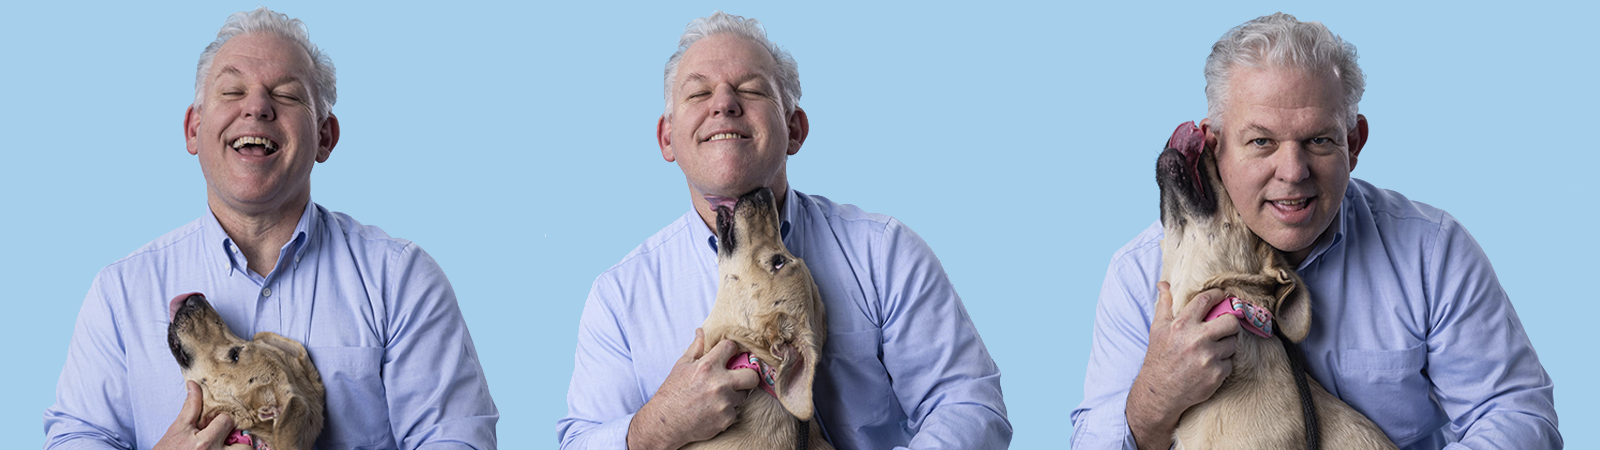 Dr. Keith Rohrer and furry friend